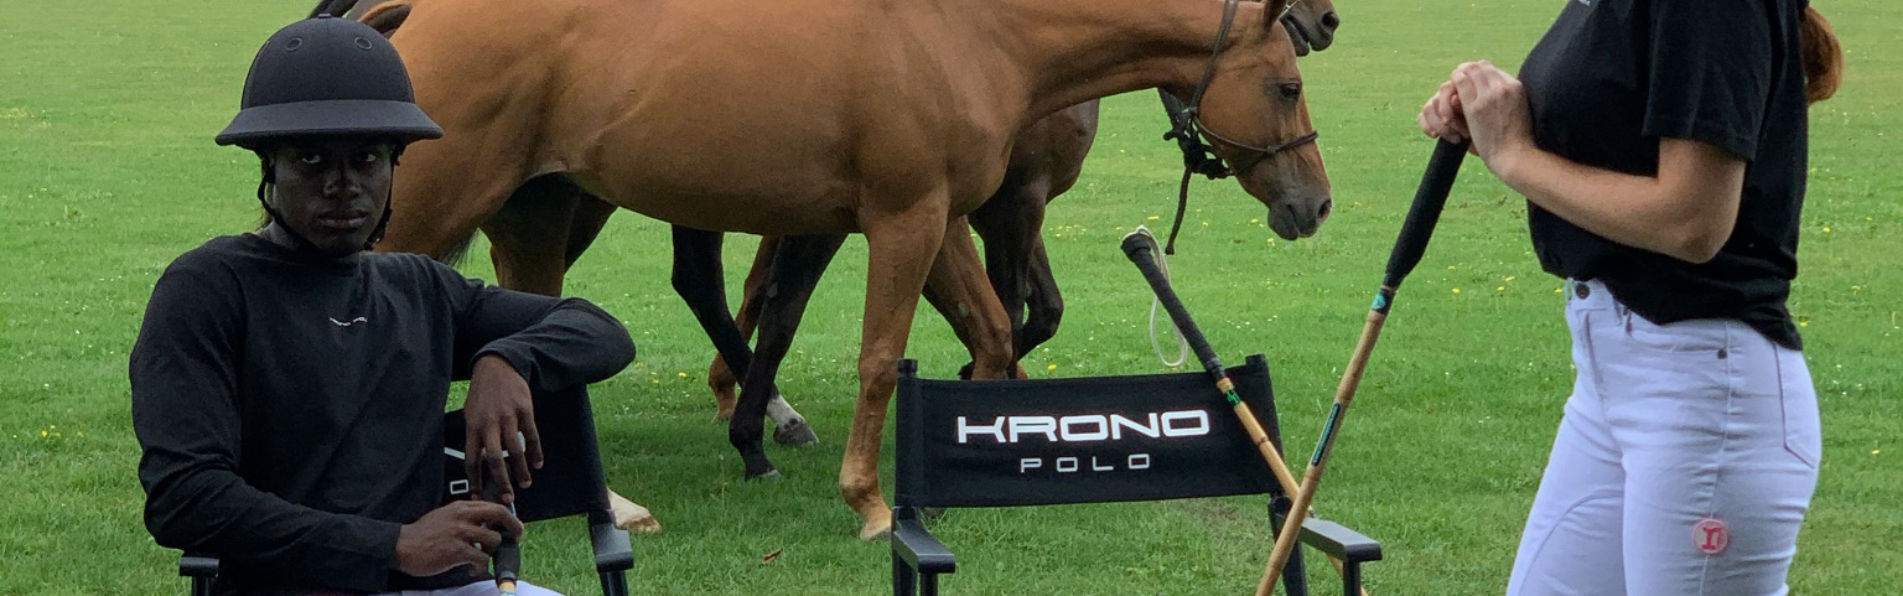 https://www.kronopolo.es/image/cache/catalog/Blog%20Banners/food-for-polo-players-1903x596.png